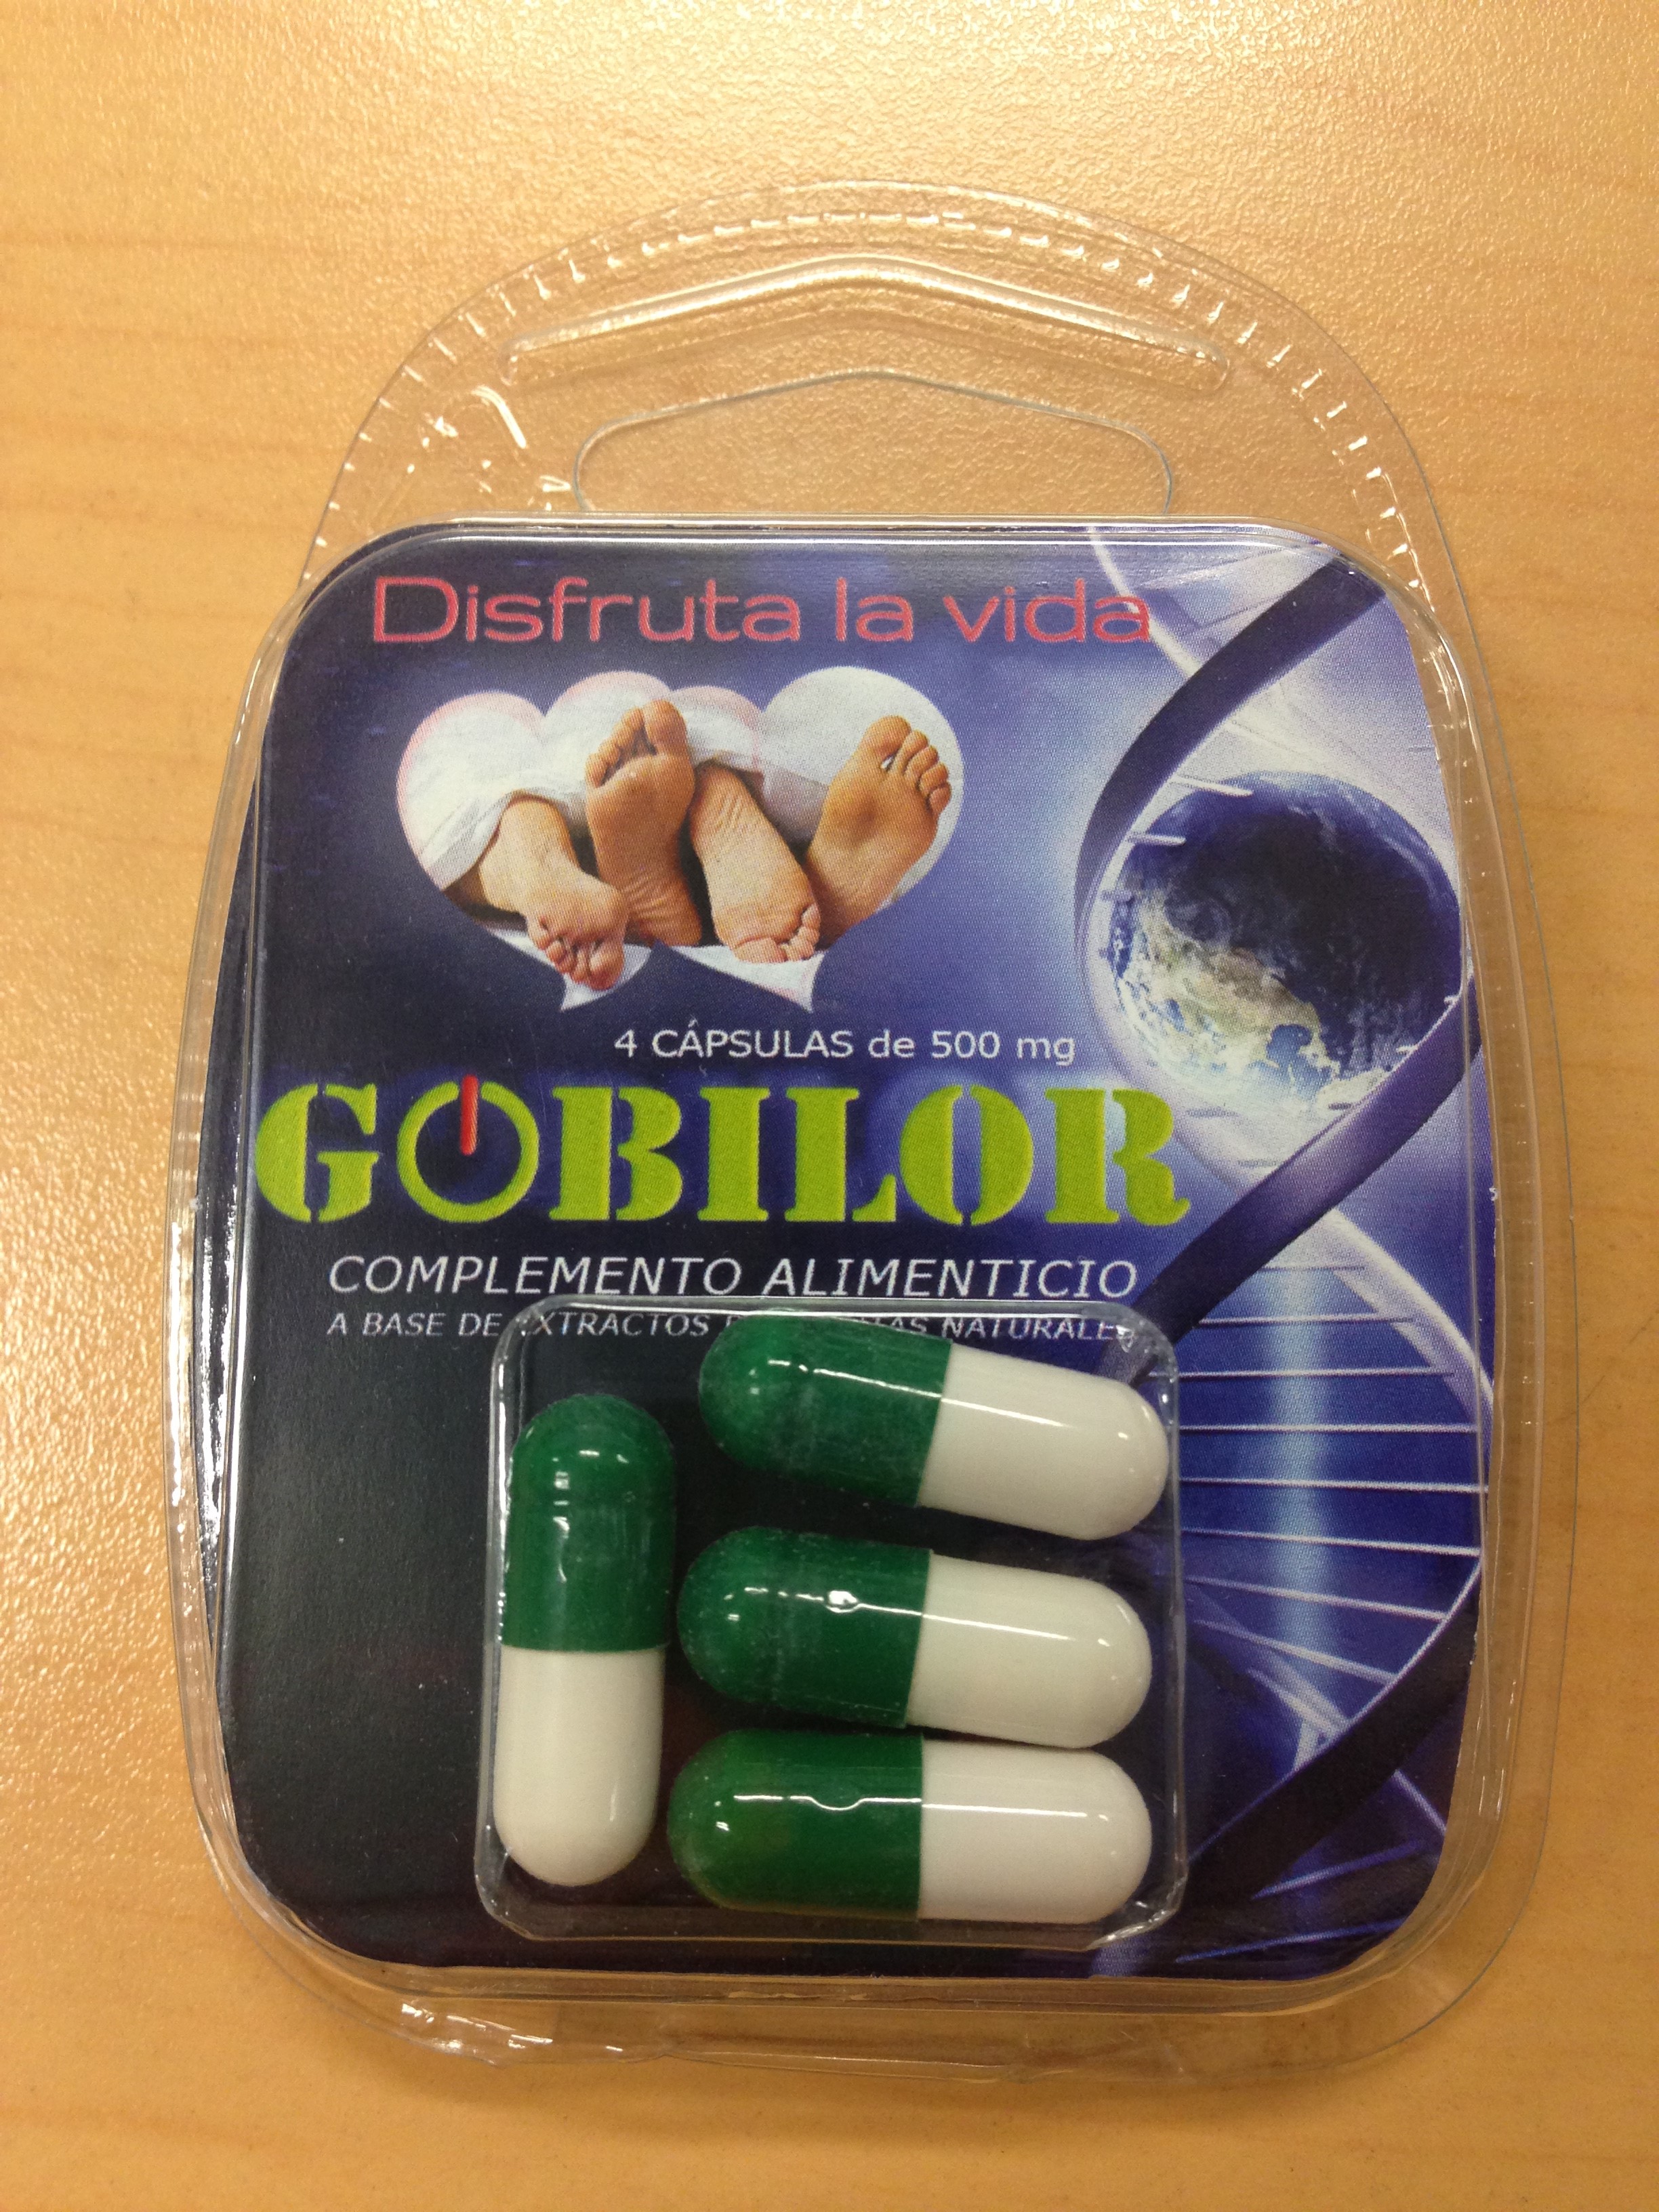 Image of the illigal product: Gobilor